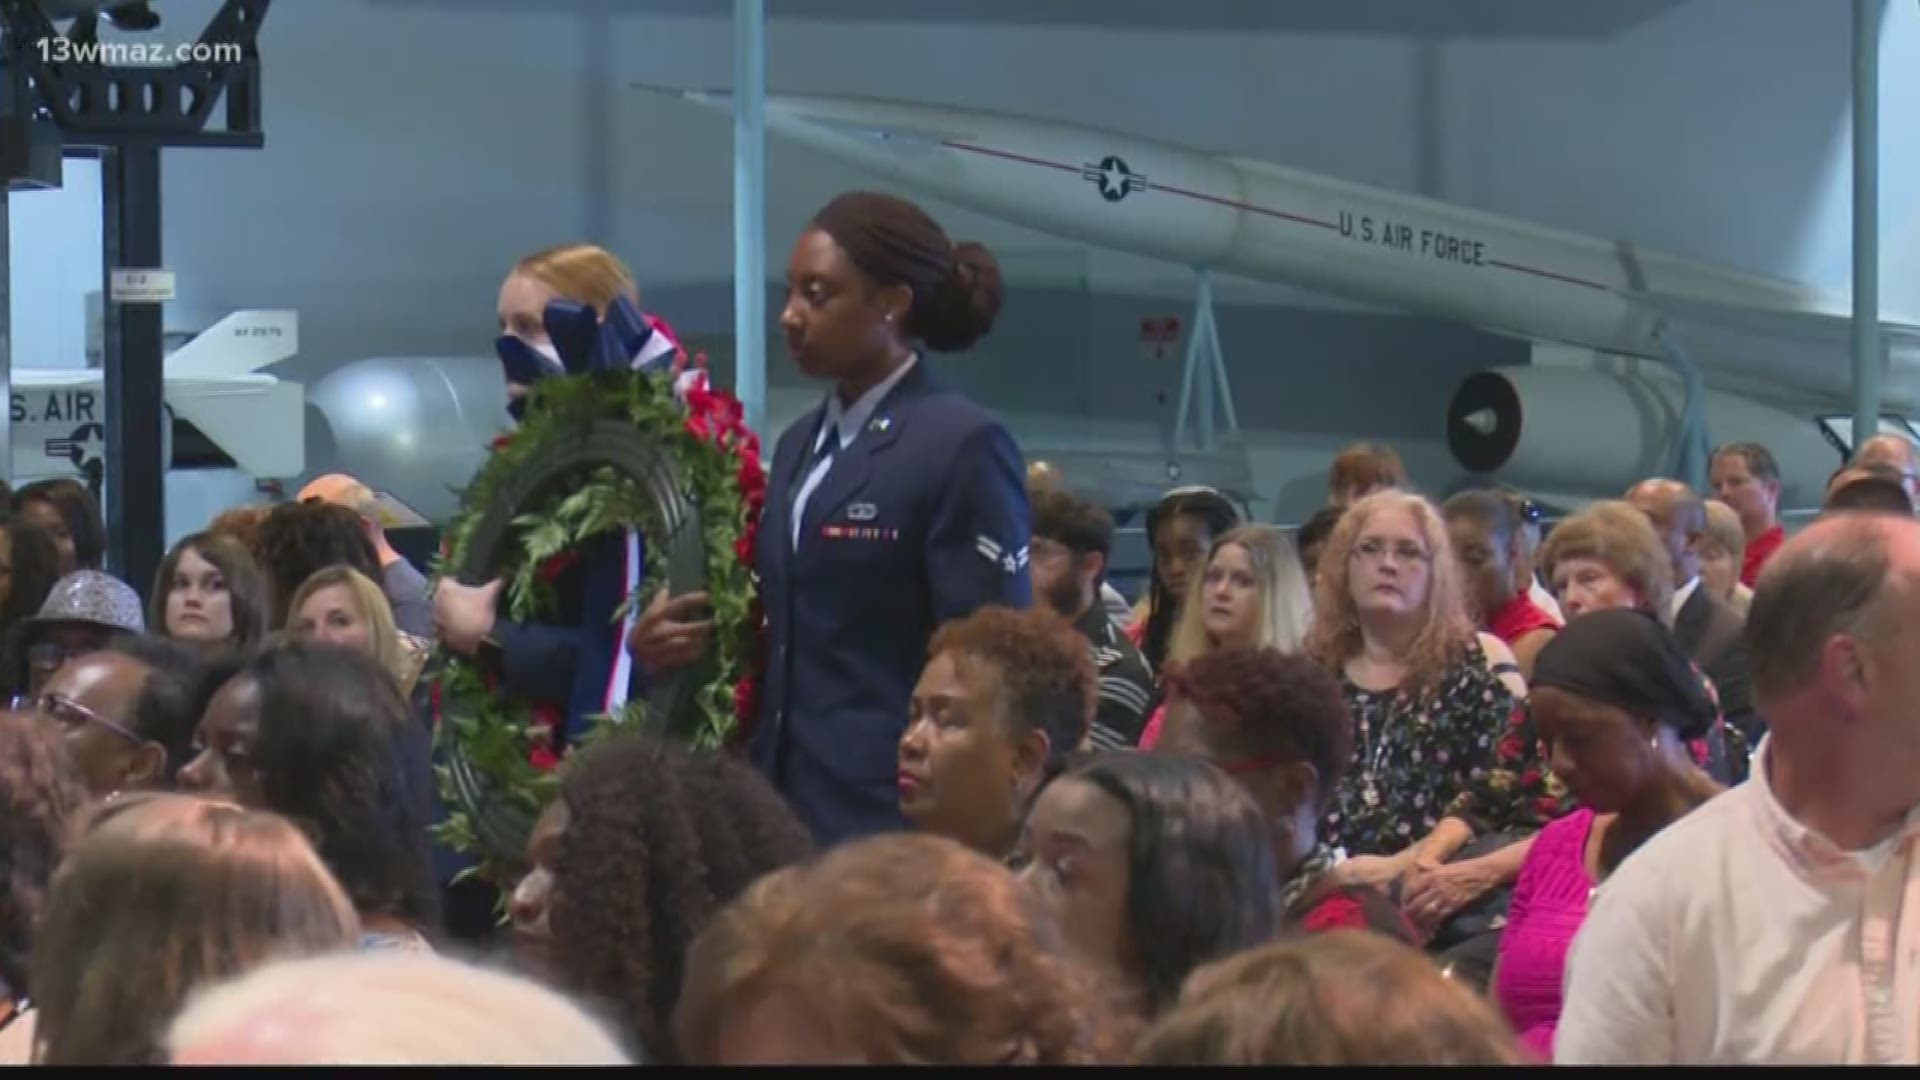 The 43rd annual Airmen's Memorial Service is a tribute to about 40 former Air Force members who sacrificed it all.